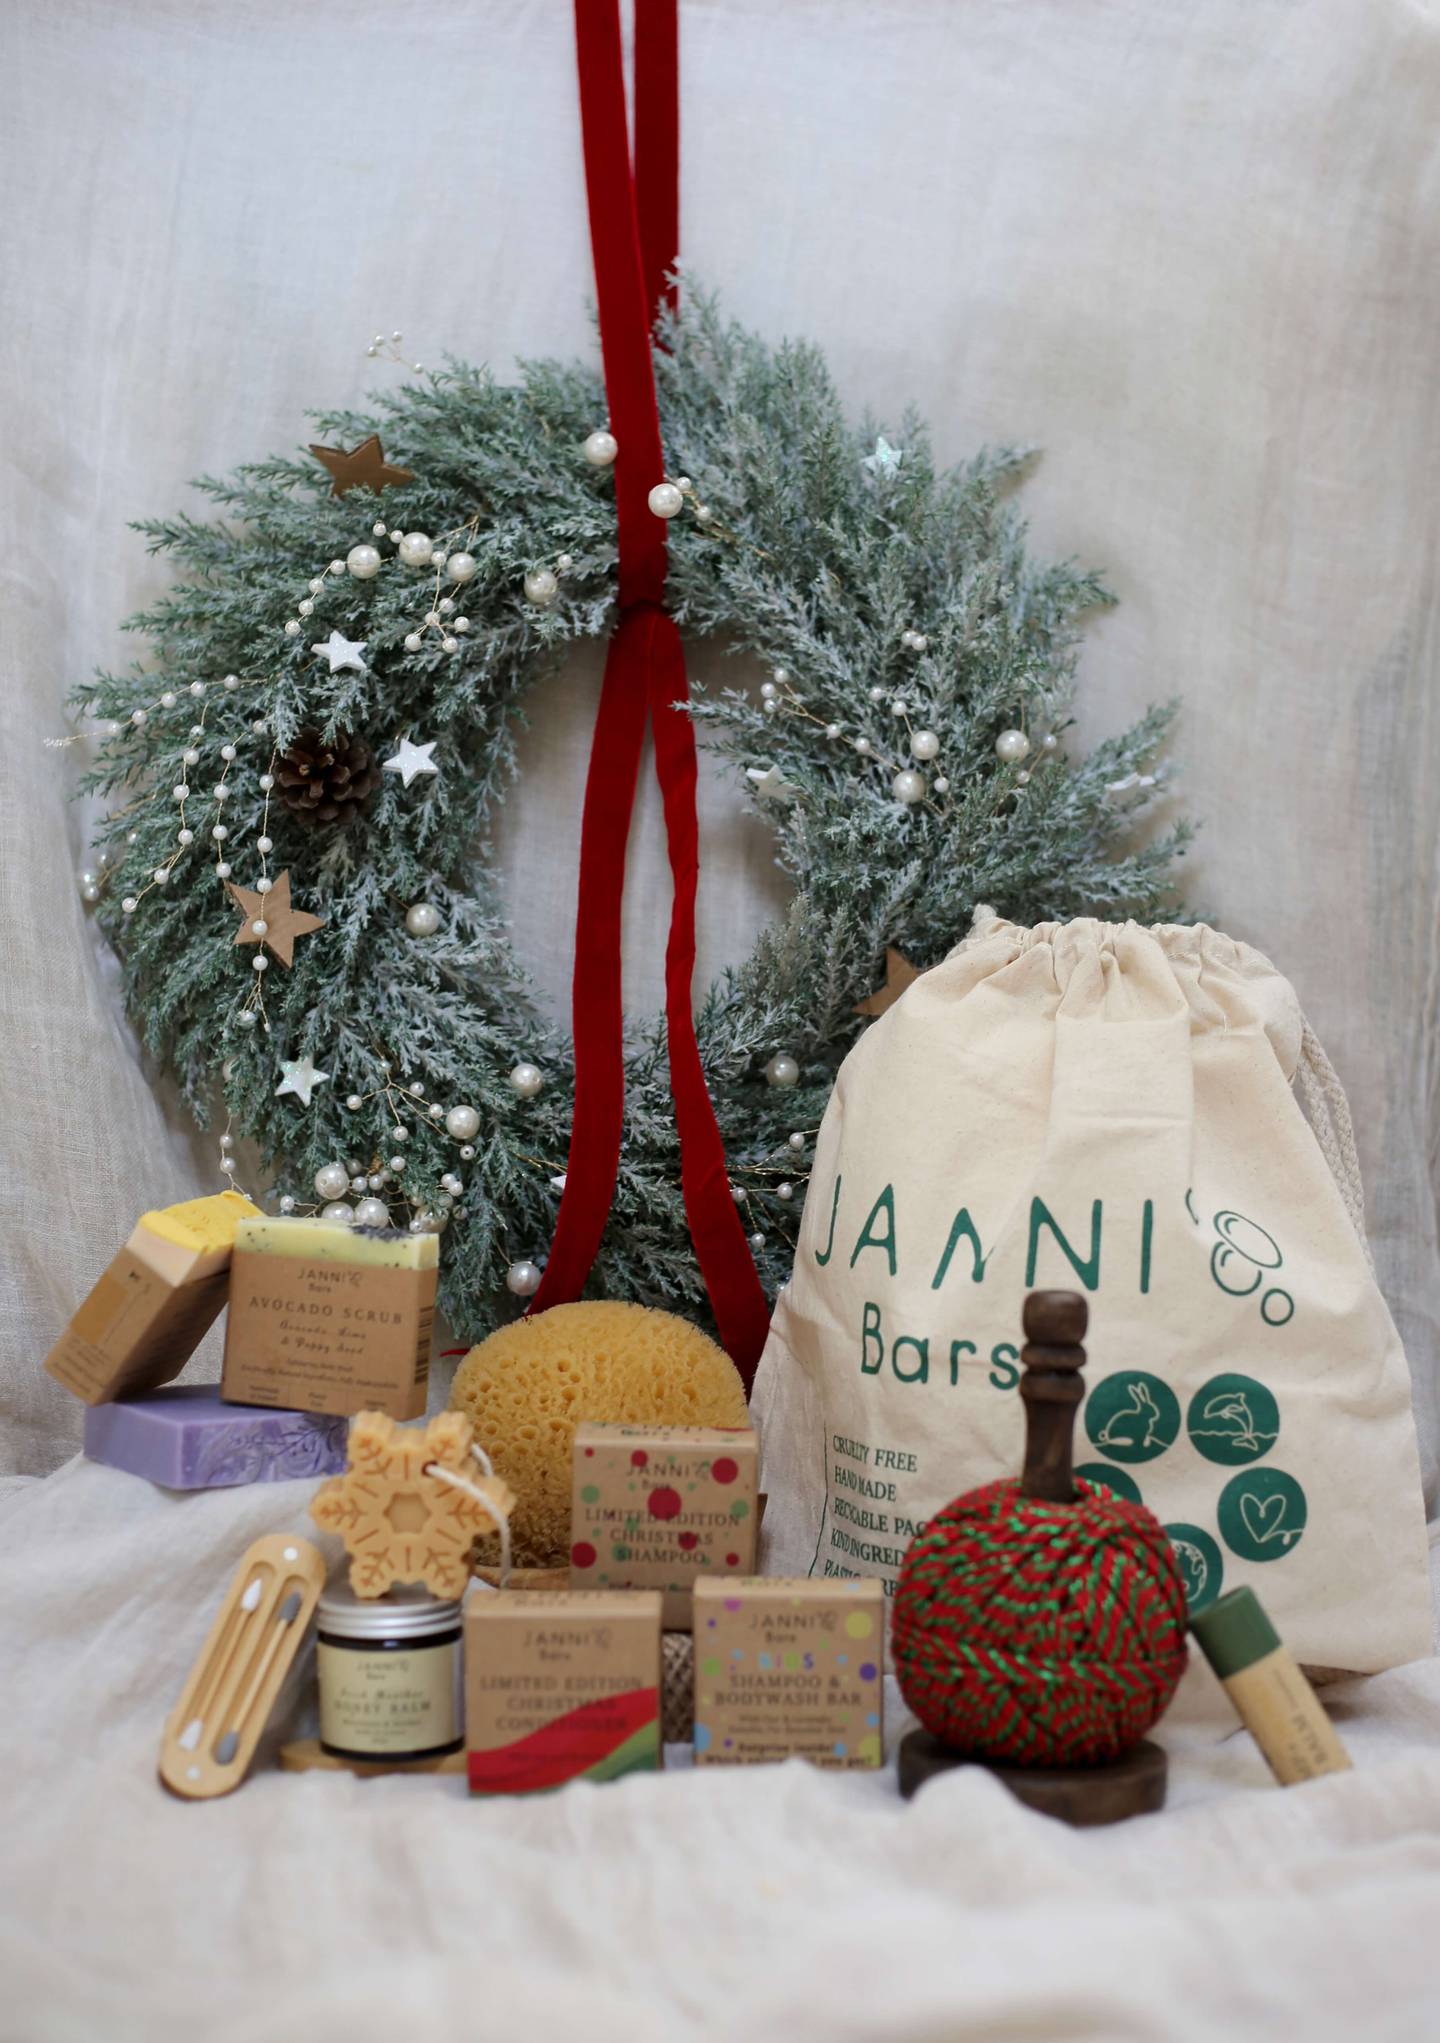 The Family Bag from Kildare-based Janni Bars, €100 from jannibars.com